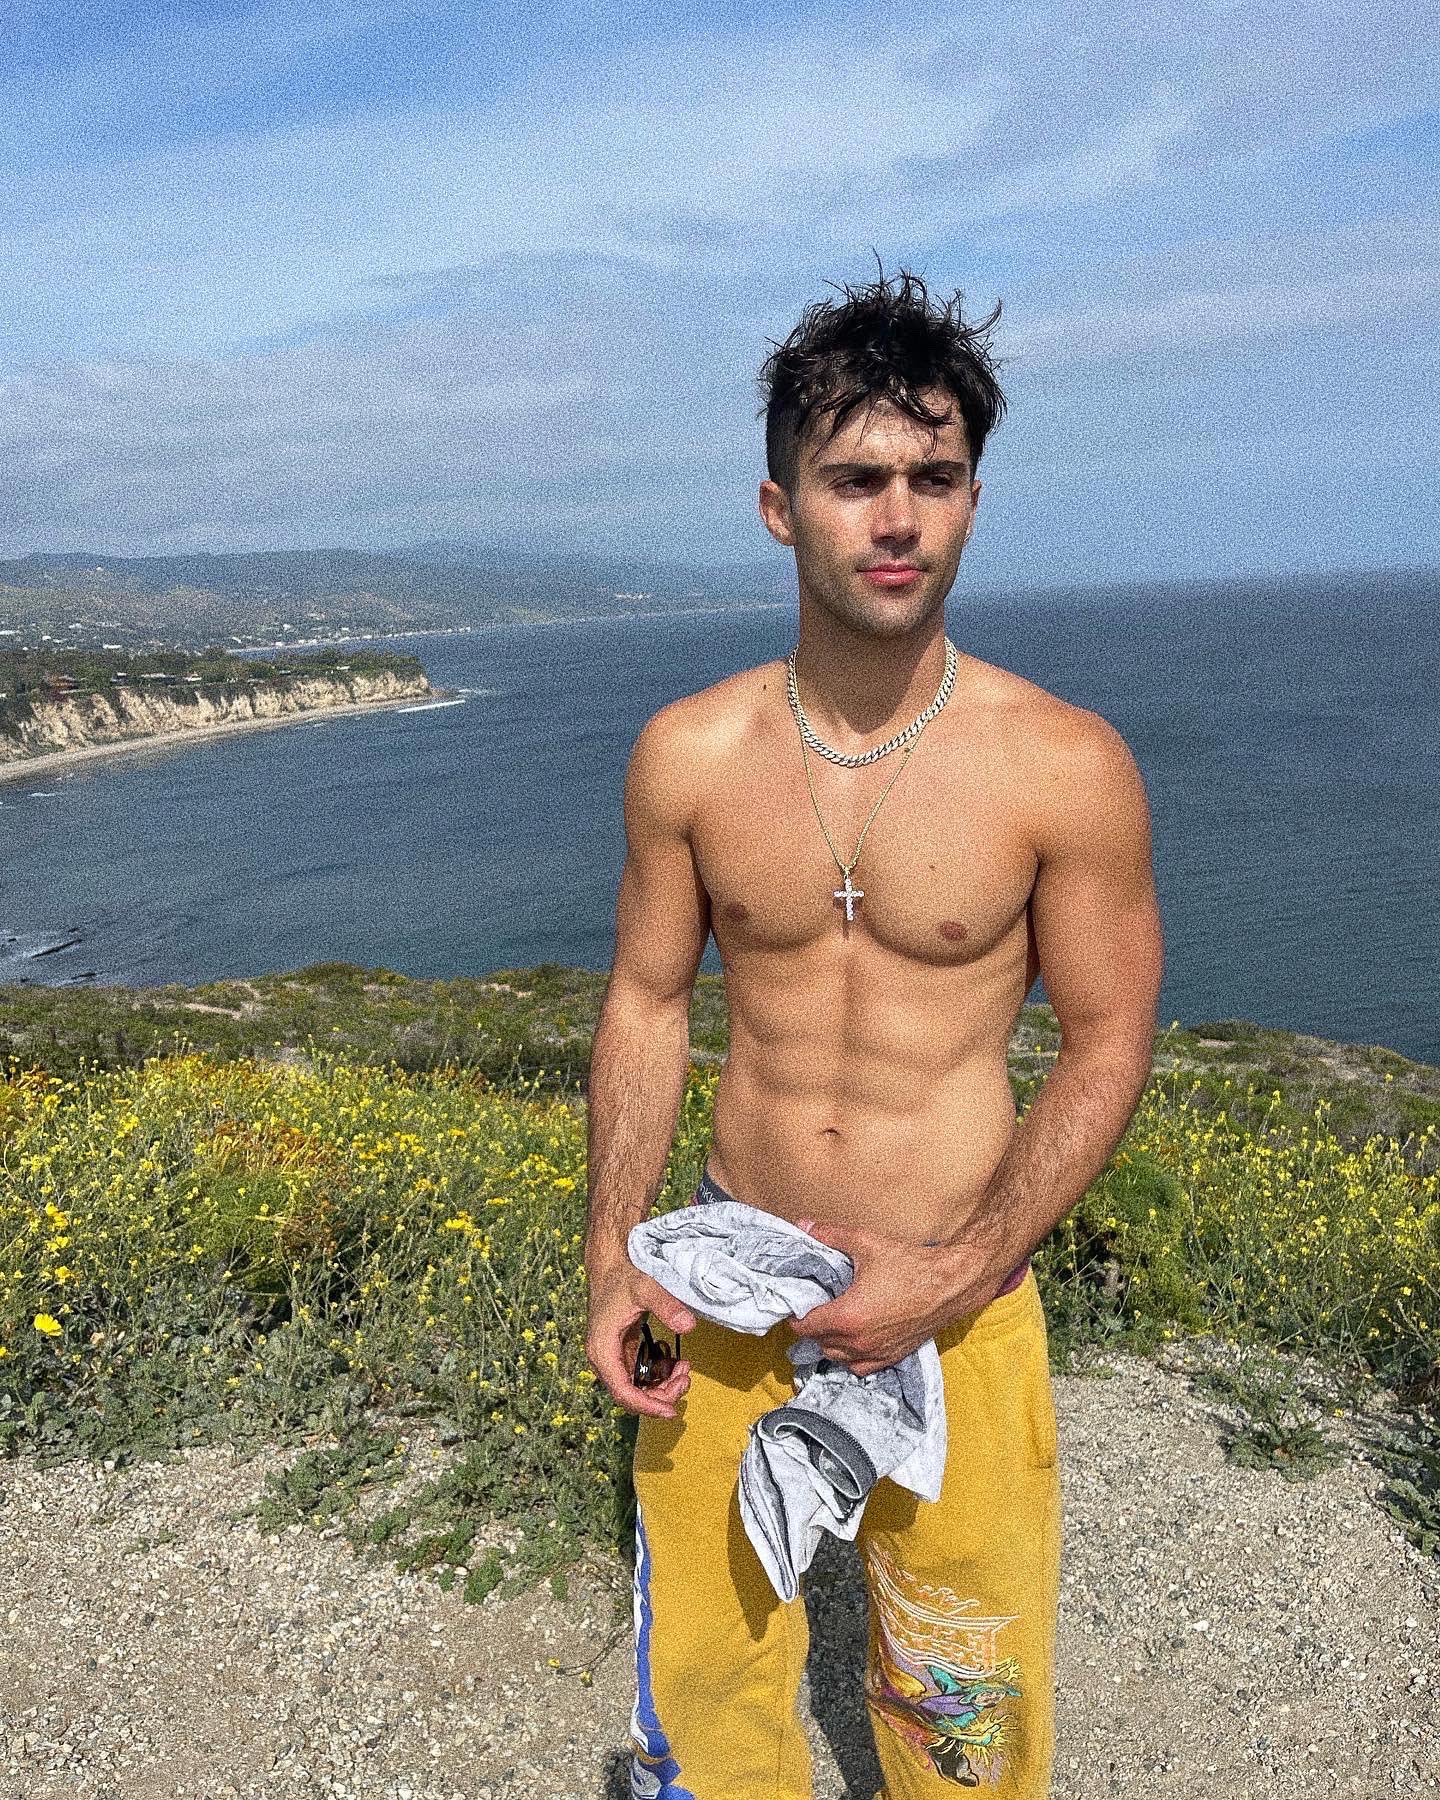 Max ehrich naked ✔ The Celebrity Instagram Follow Your Favor